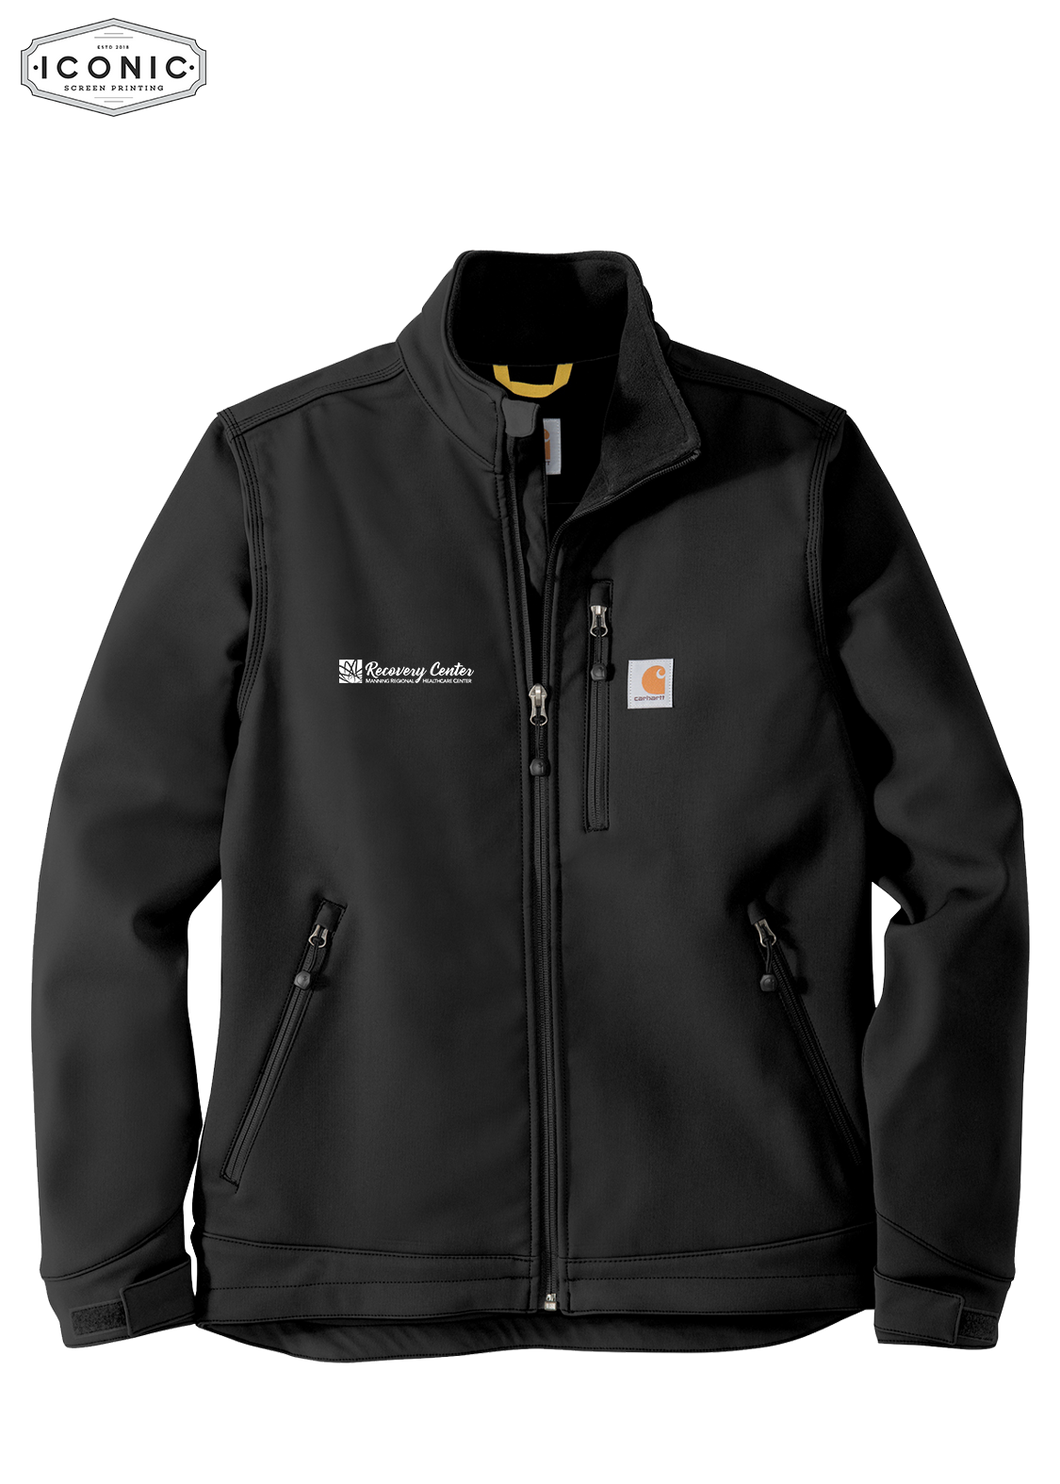 Manning Regional Healthcare - Carhartt Crowley Soft Shell Jacket - embroidery